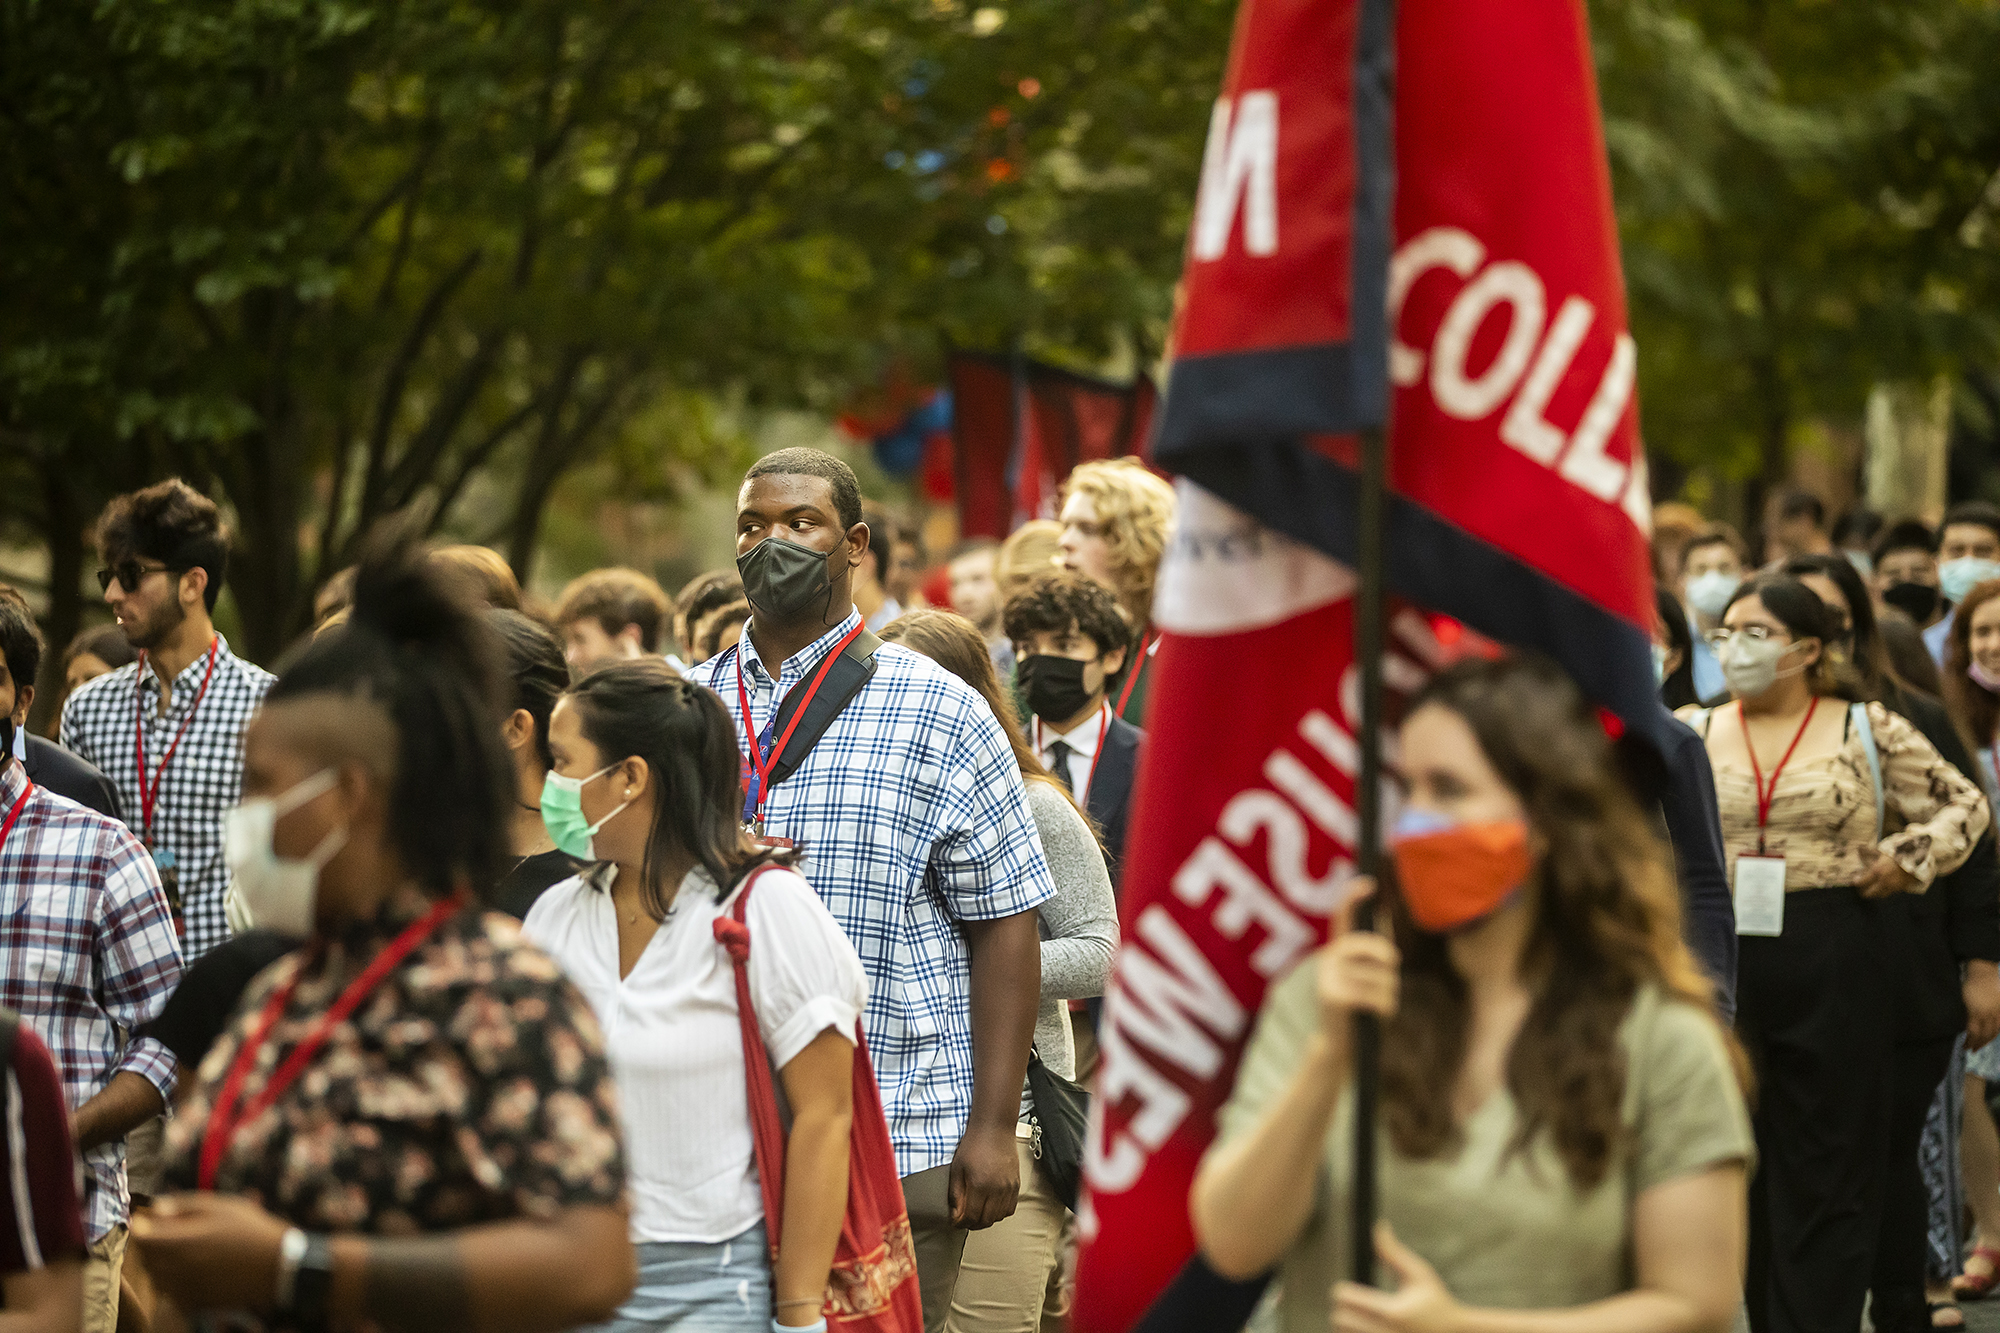 Students carrying college house flags march across campus to the 2021 Convocation ceremony